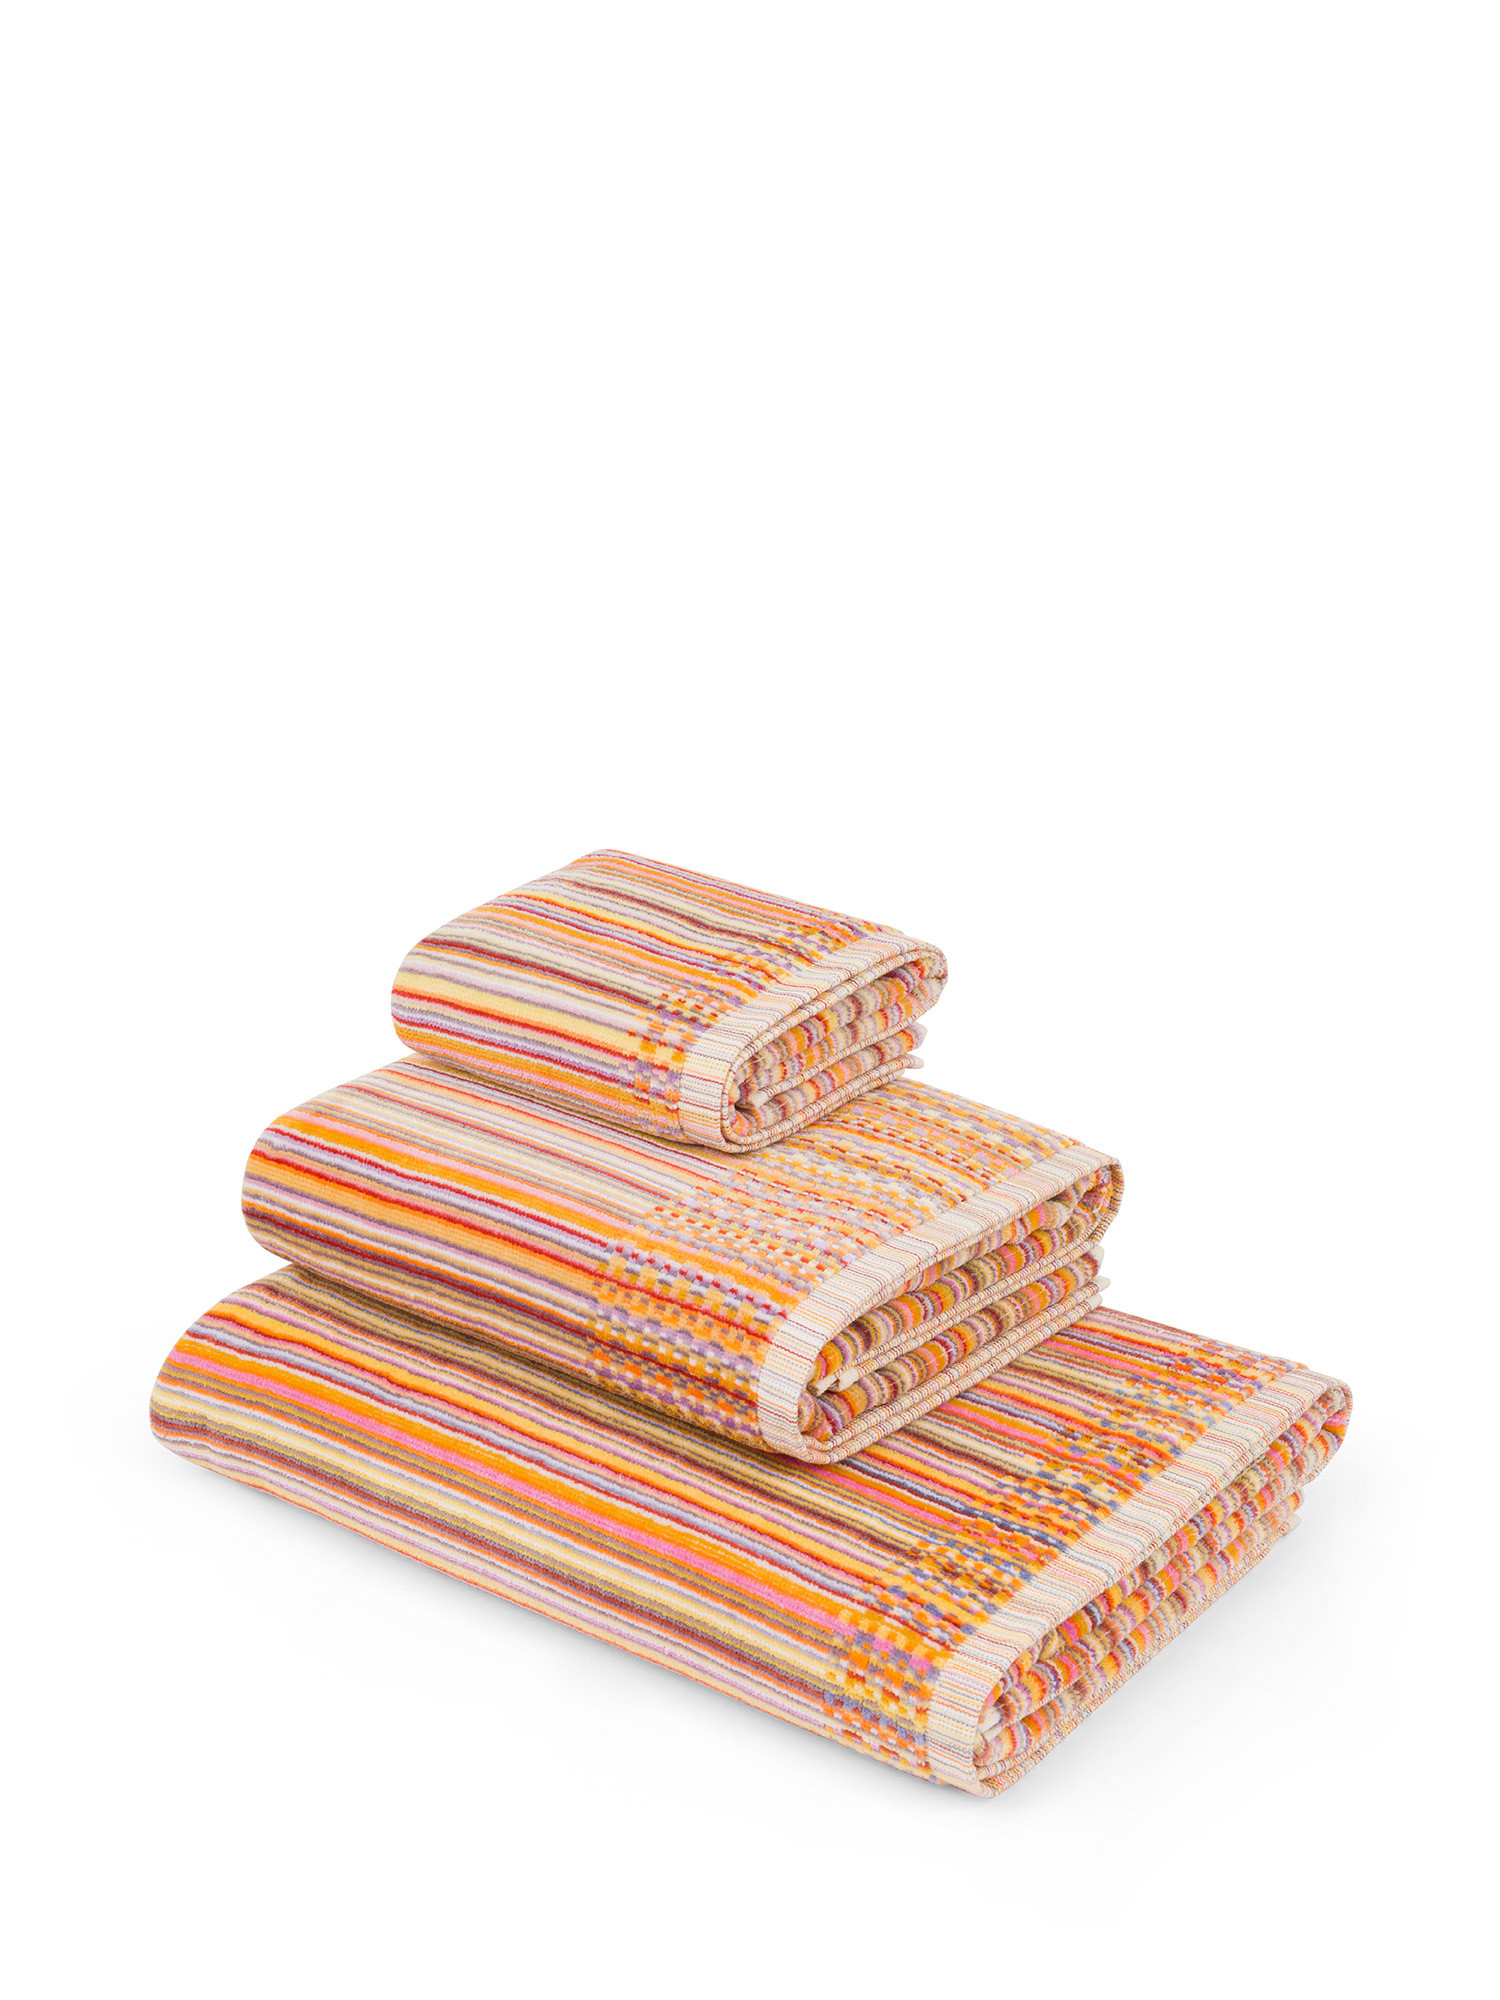 Velor cotton towel with striped pattern, Multicolor, large image number 0